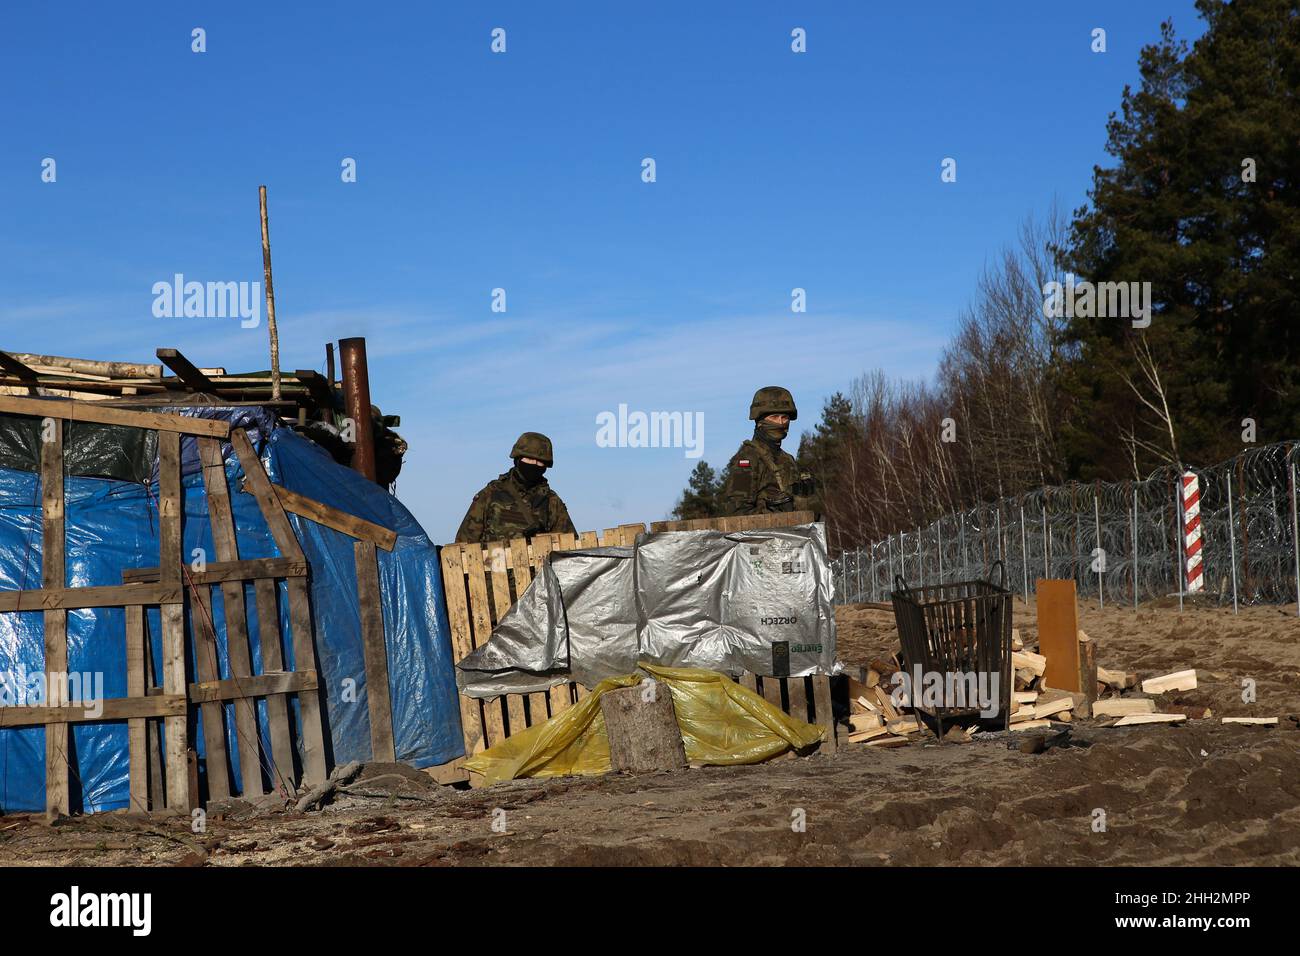 18 January 2022, Poland, Usnarz Gorny: Soldiers stand in front of a shelter in the restricted zone on Poland's border with Belarus. Poland has fortified the EU's external border with a barbed wire fence to make it difficult for migrants to cross. Photo: Doris Heimann/dpa Stock Photo